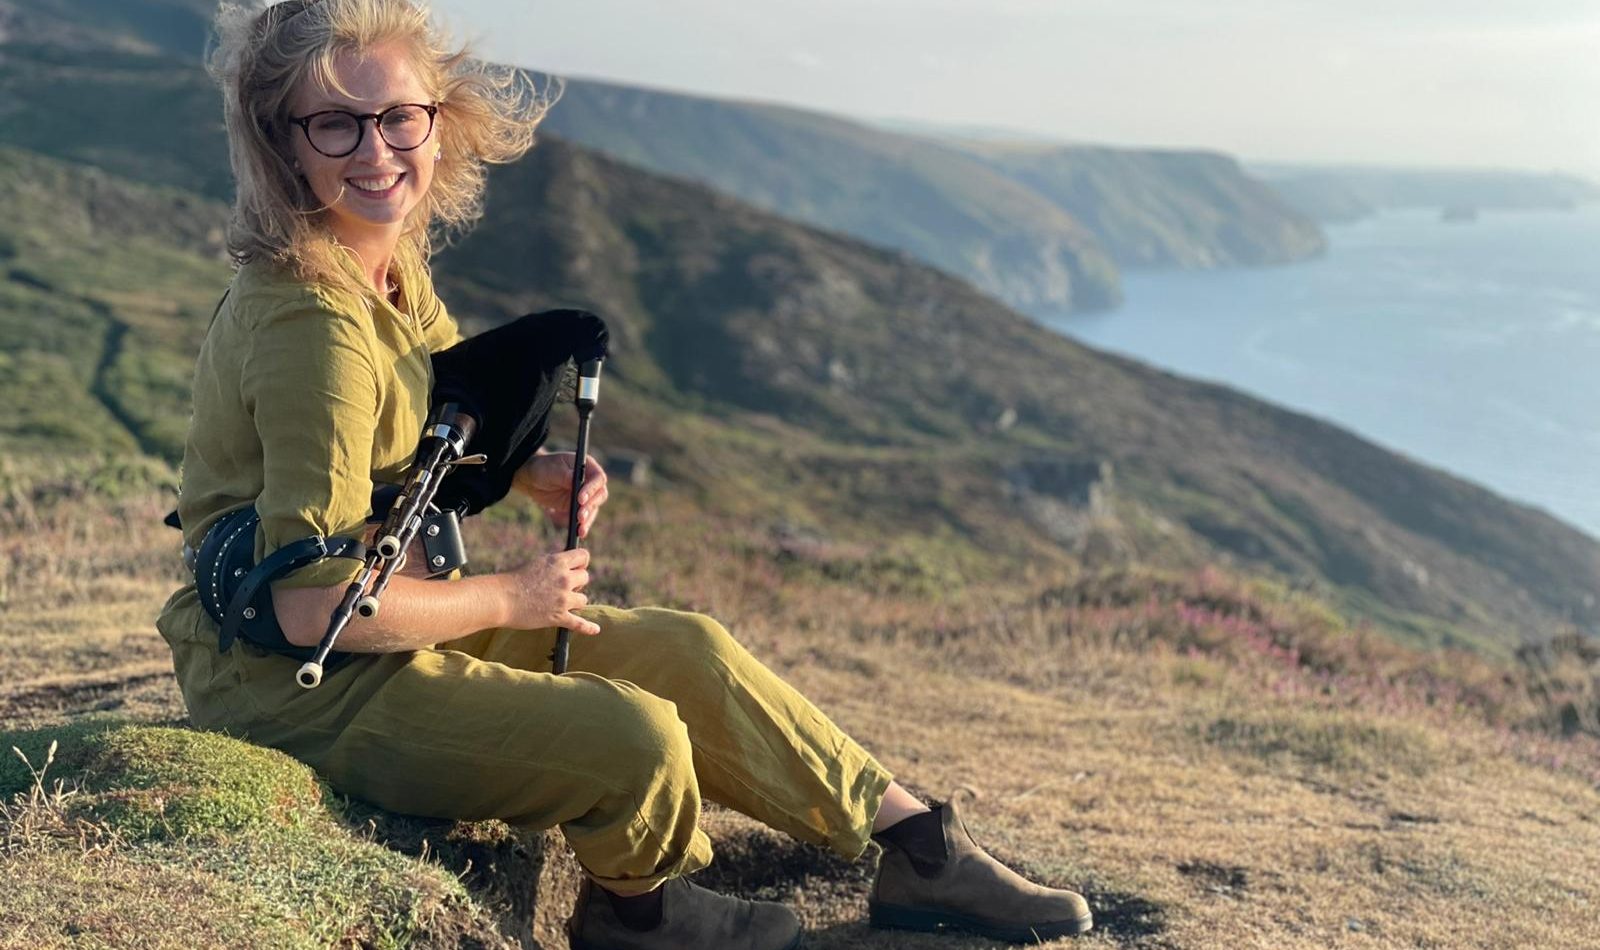 Hattie McCall Davies, a young white woman with blonde hair and glasses, sits on a clifftop with her scottish smallpipes. Behind her, a dramatic clifftop descends into the sea.